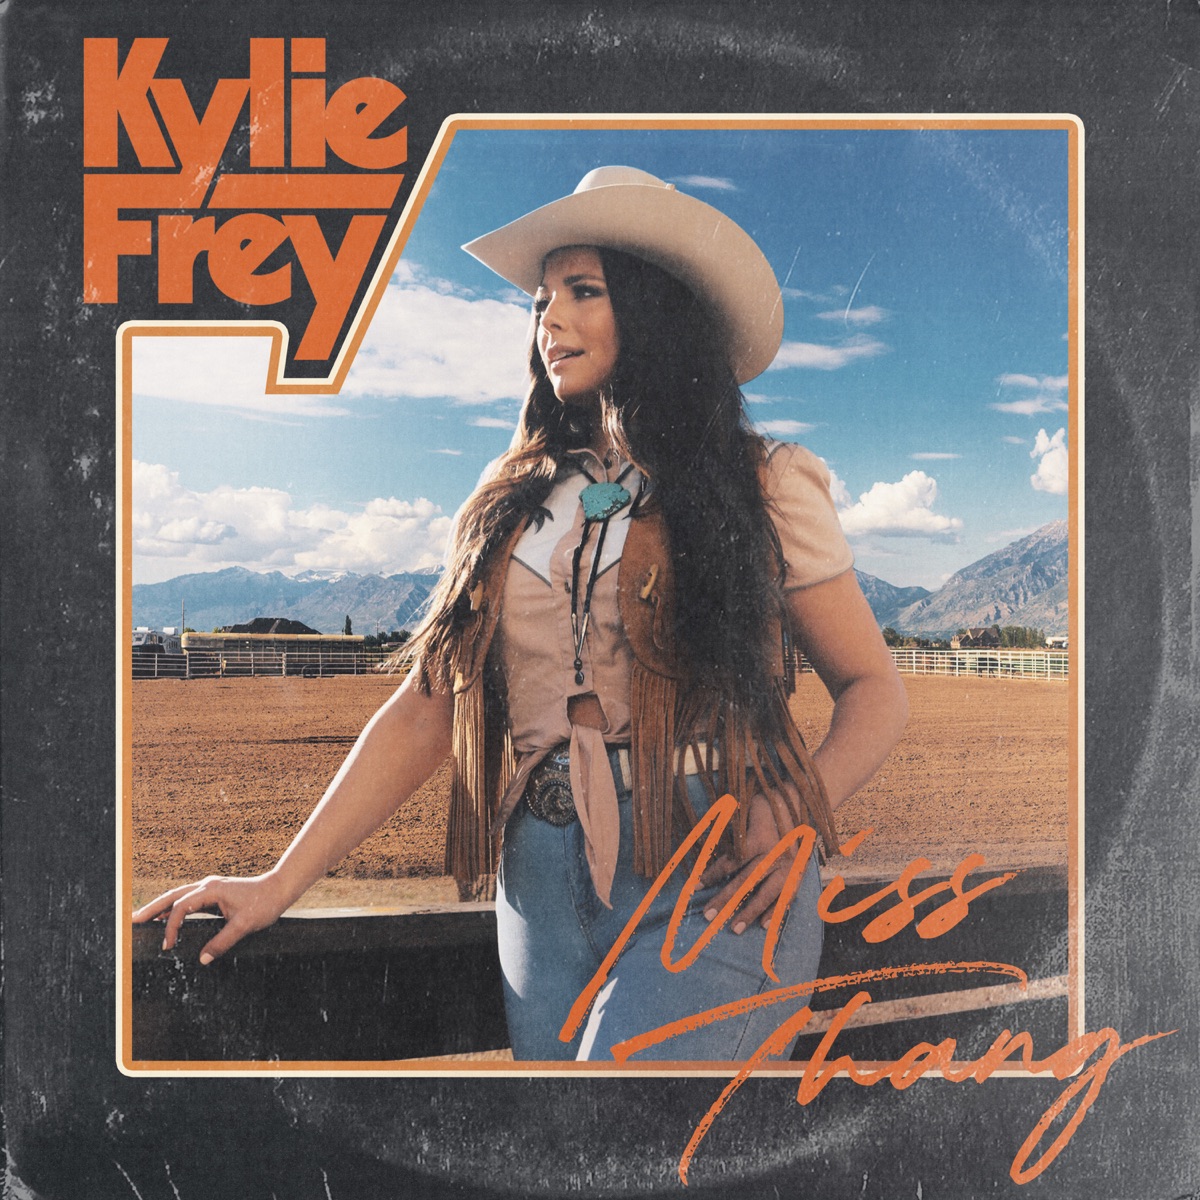 Kylie Frey Miss Thang cover artwork